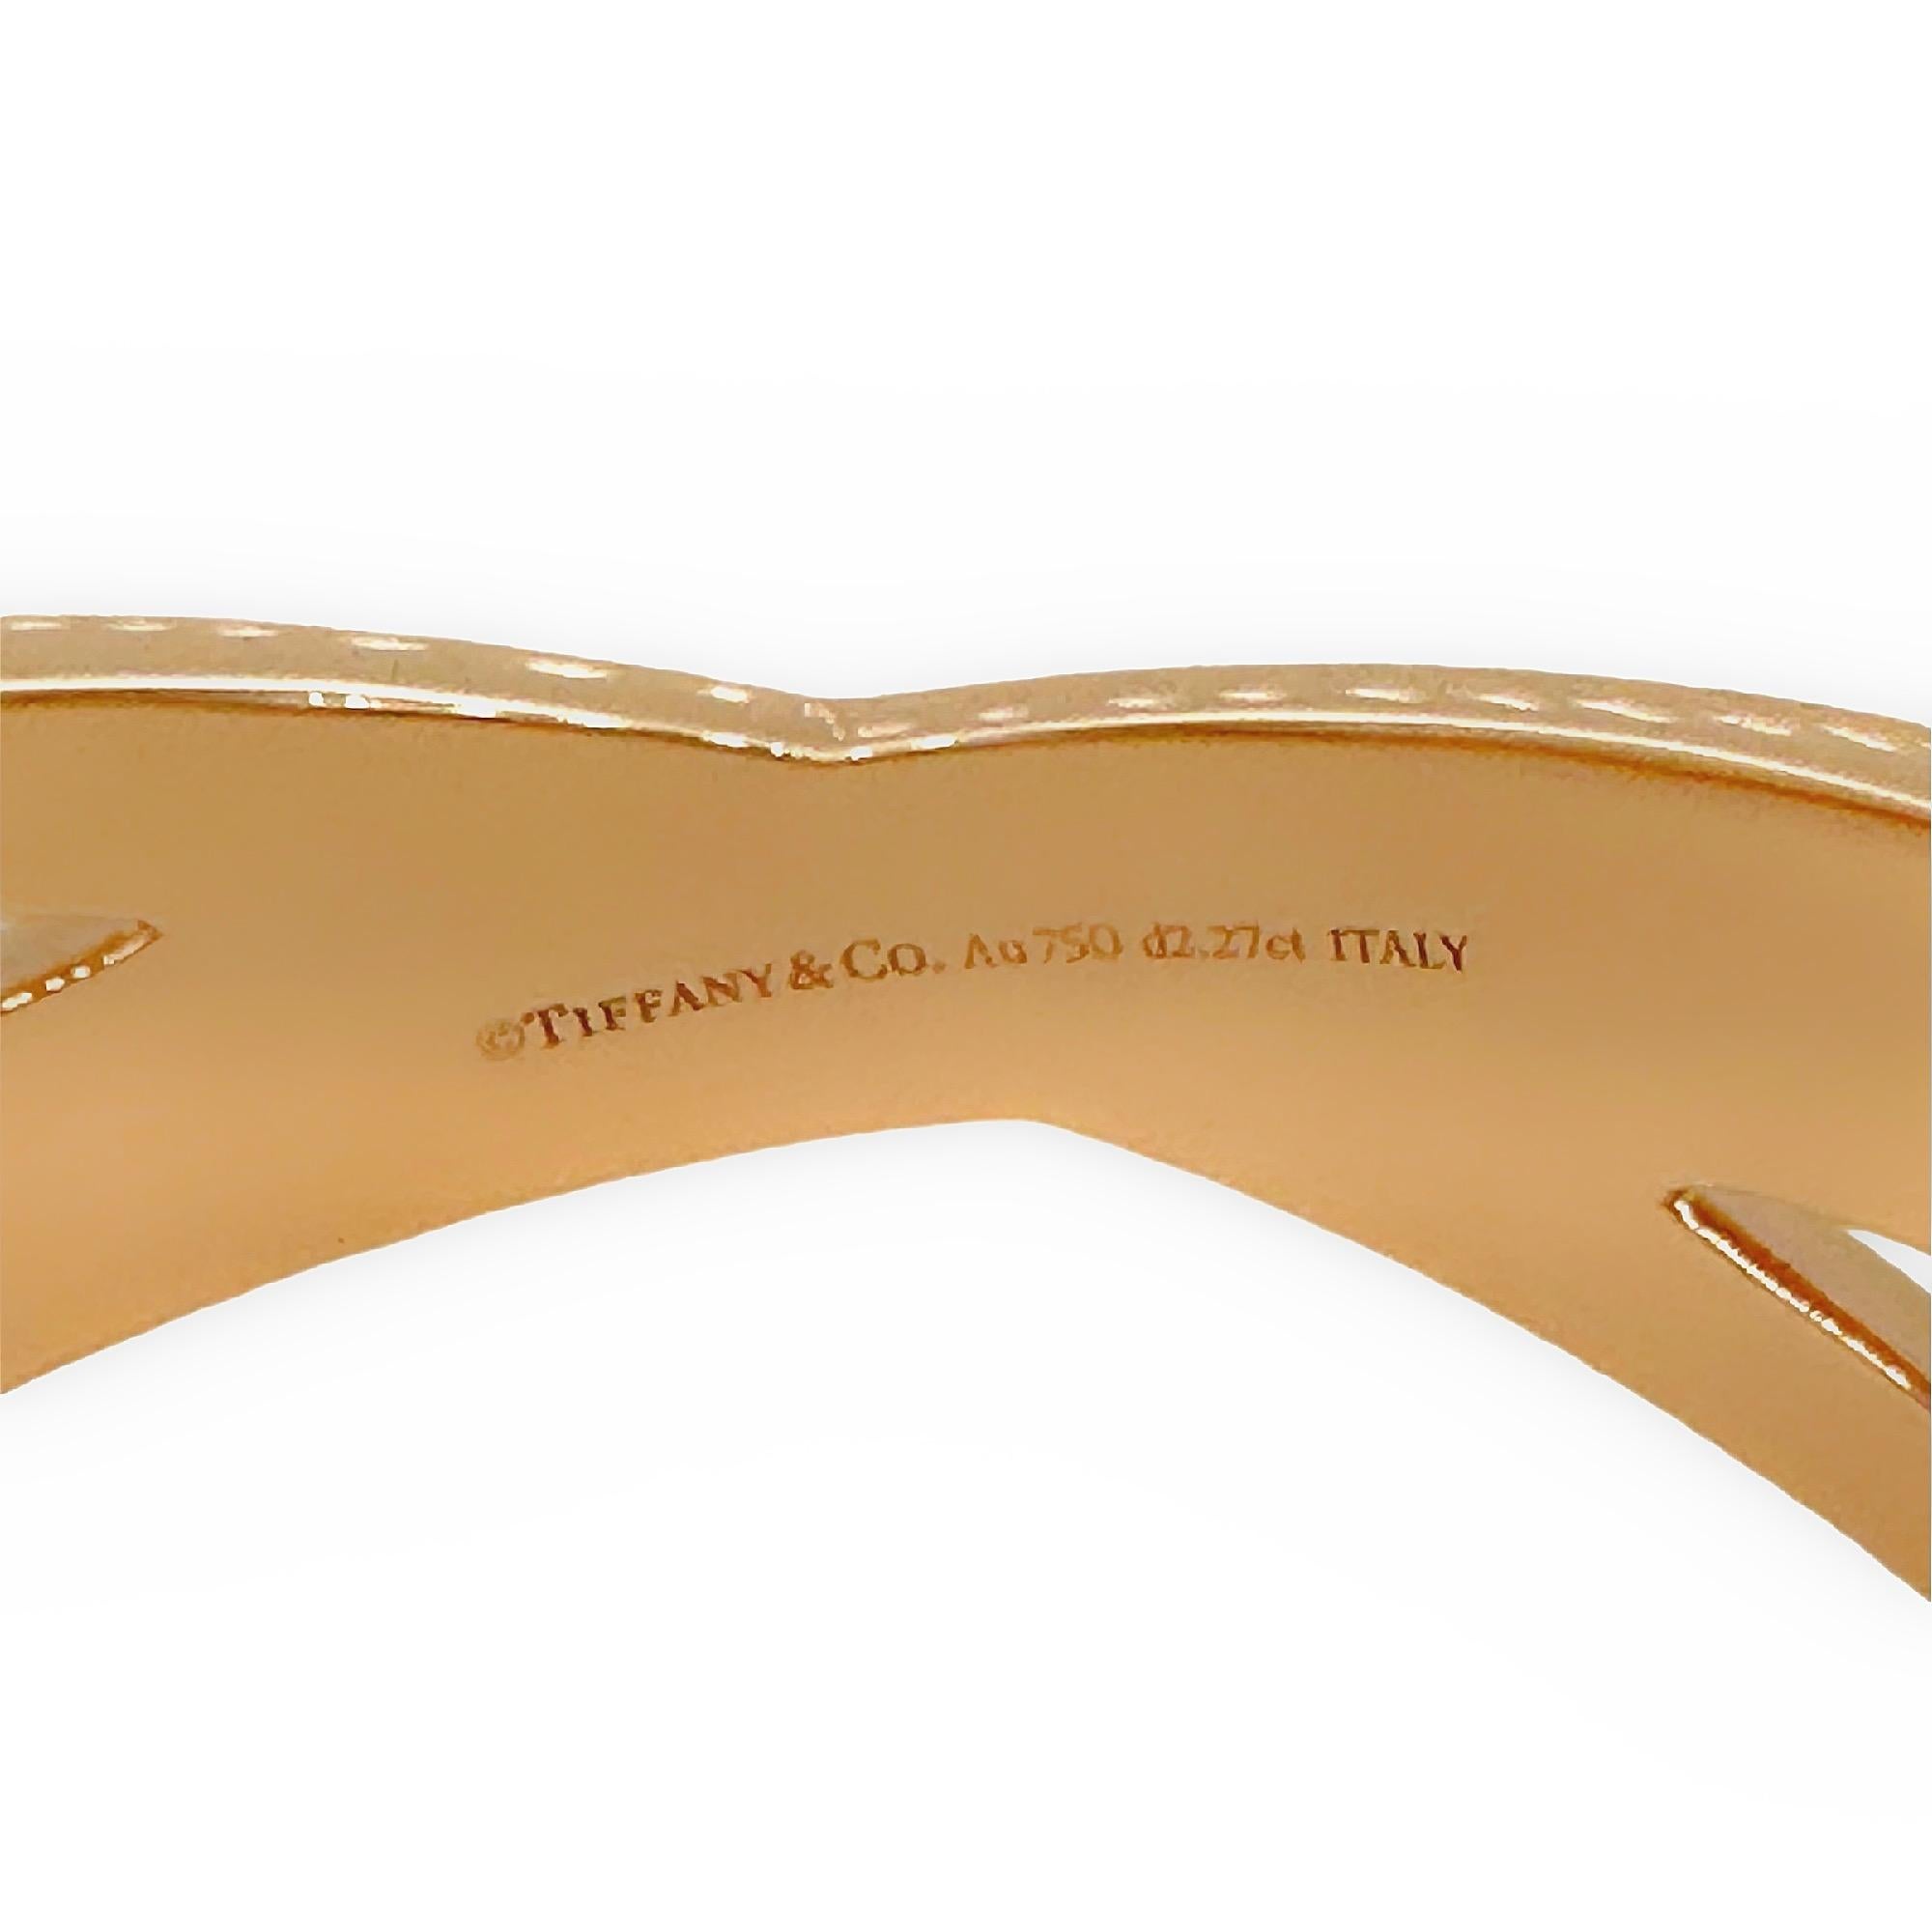 Tiffany & Co. Atlas Wide X 2.27 tcw Diamond Bangle Bracelet 18kt Rose Gold In Excellent Condition For Sale In San Diego, CA